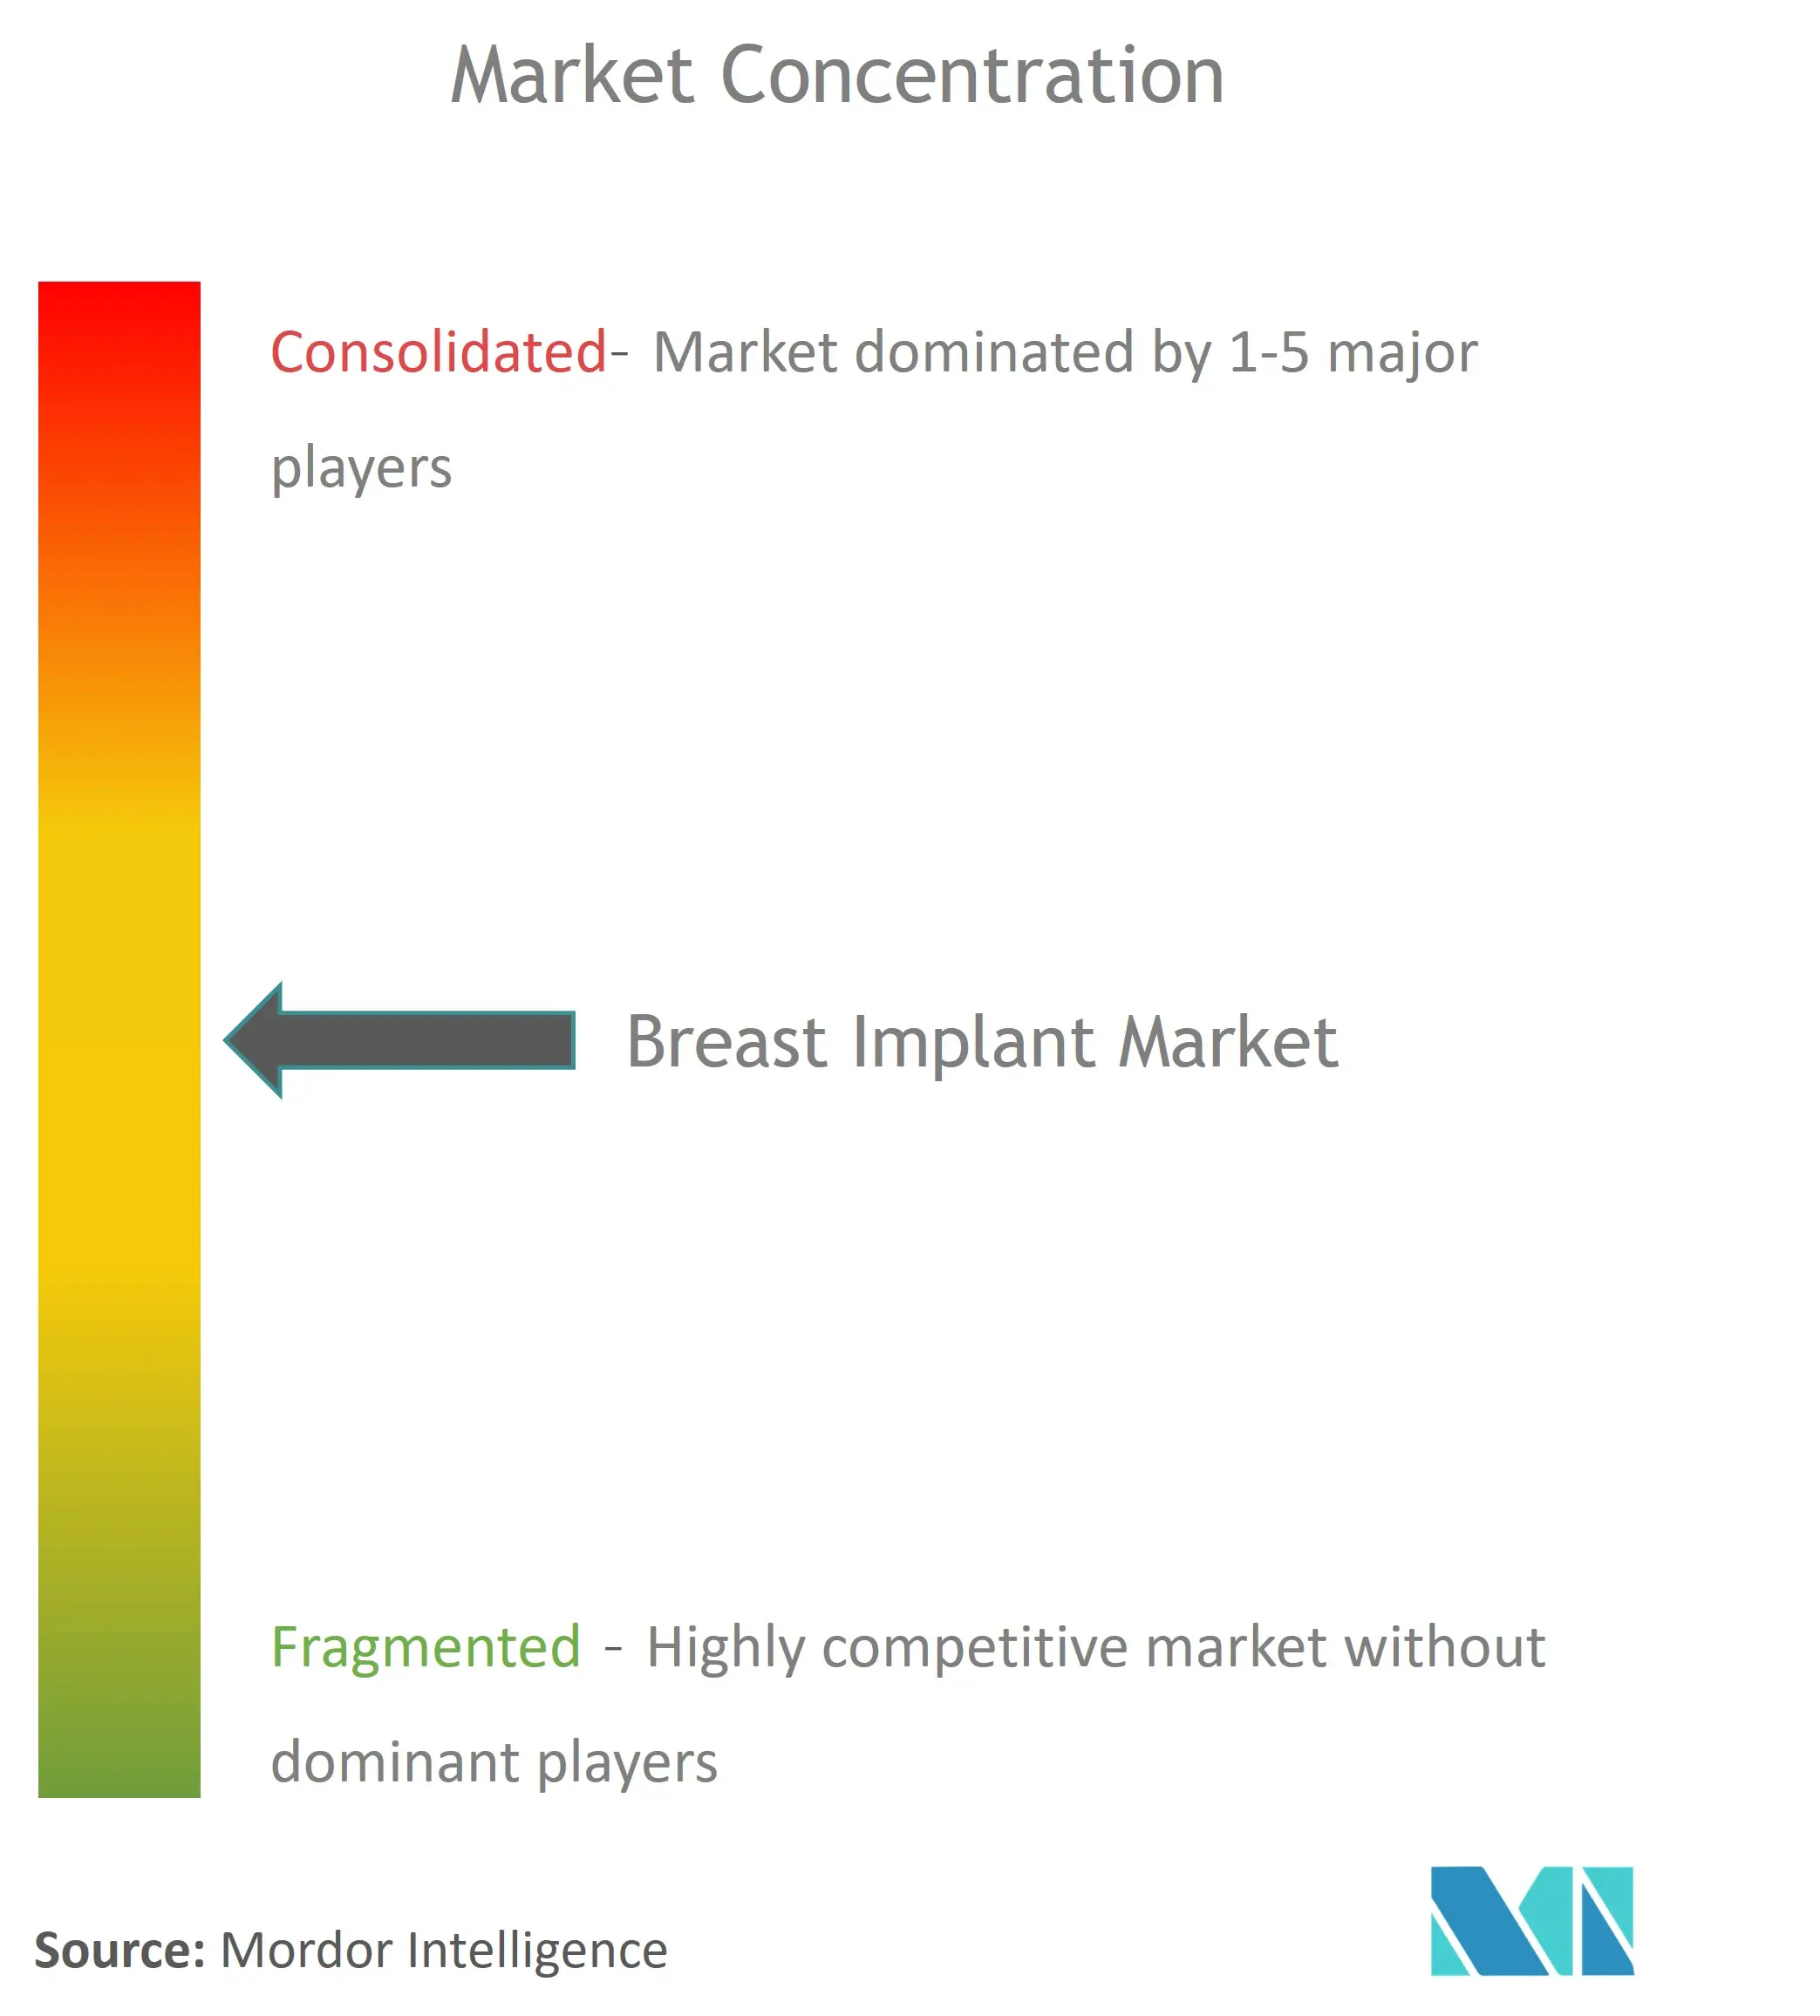 Breast Implant Market Concentration